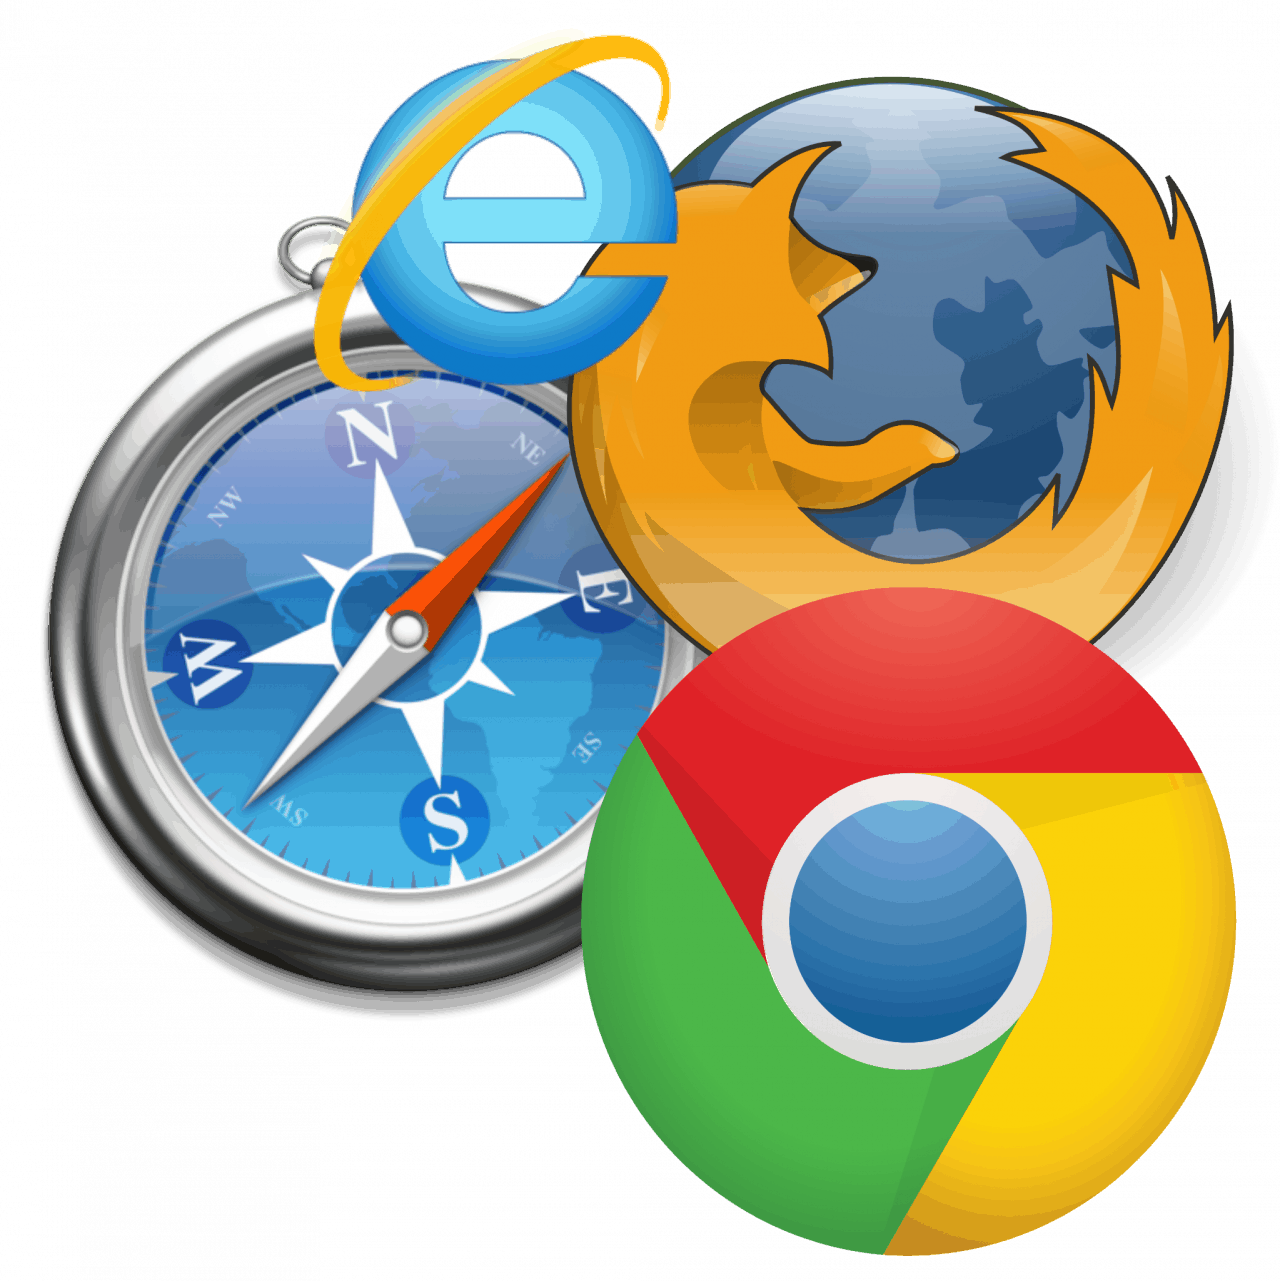 Many different browsers